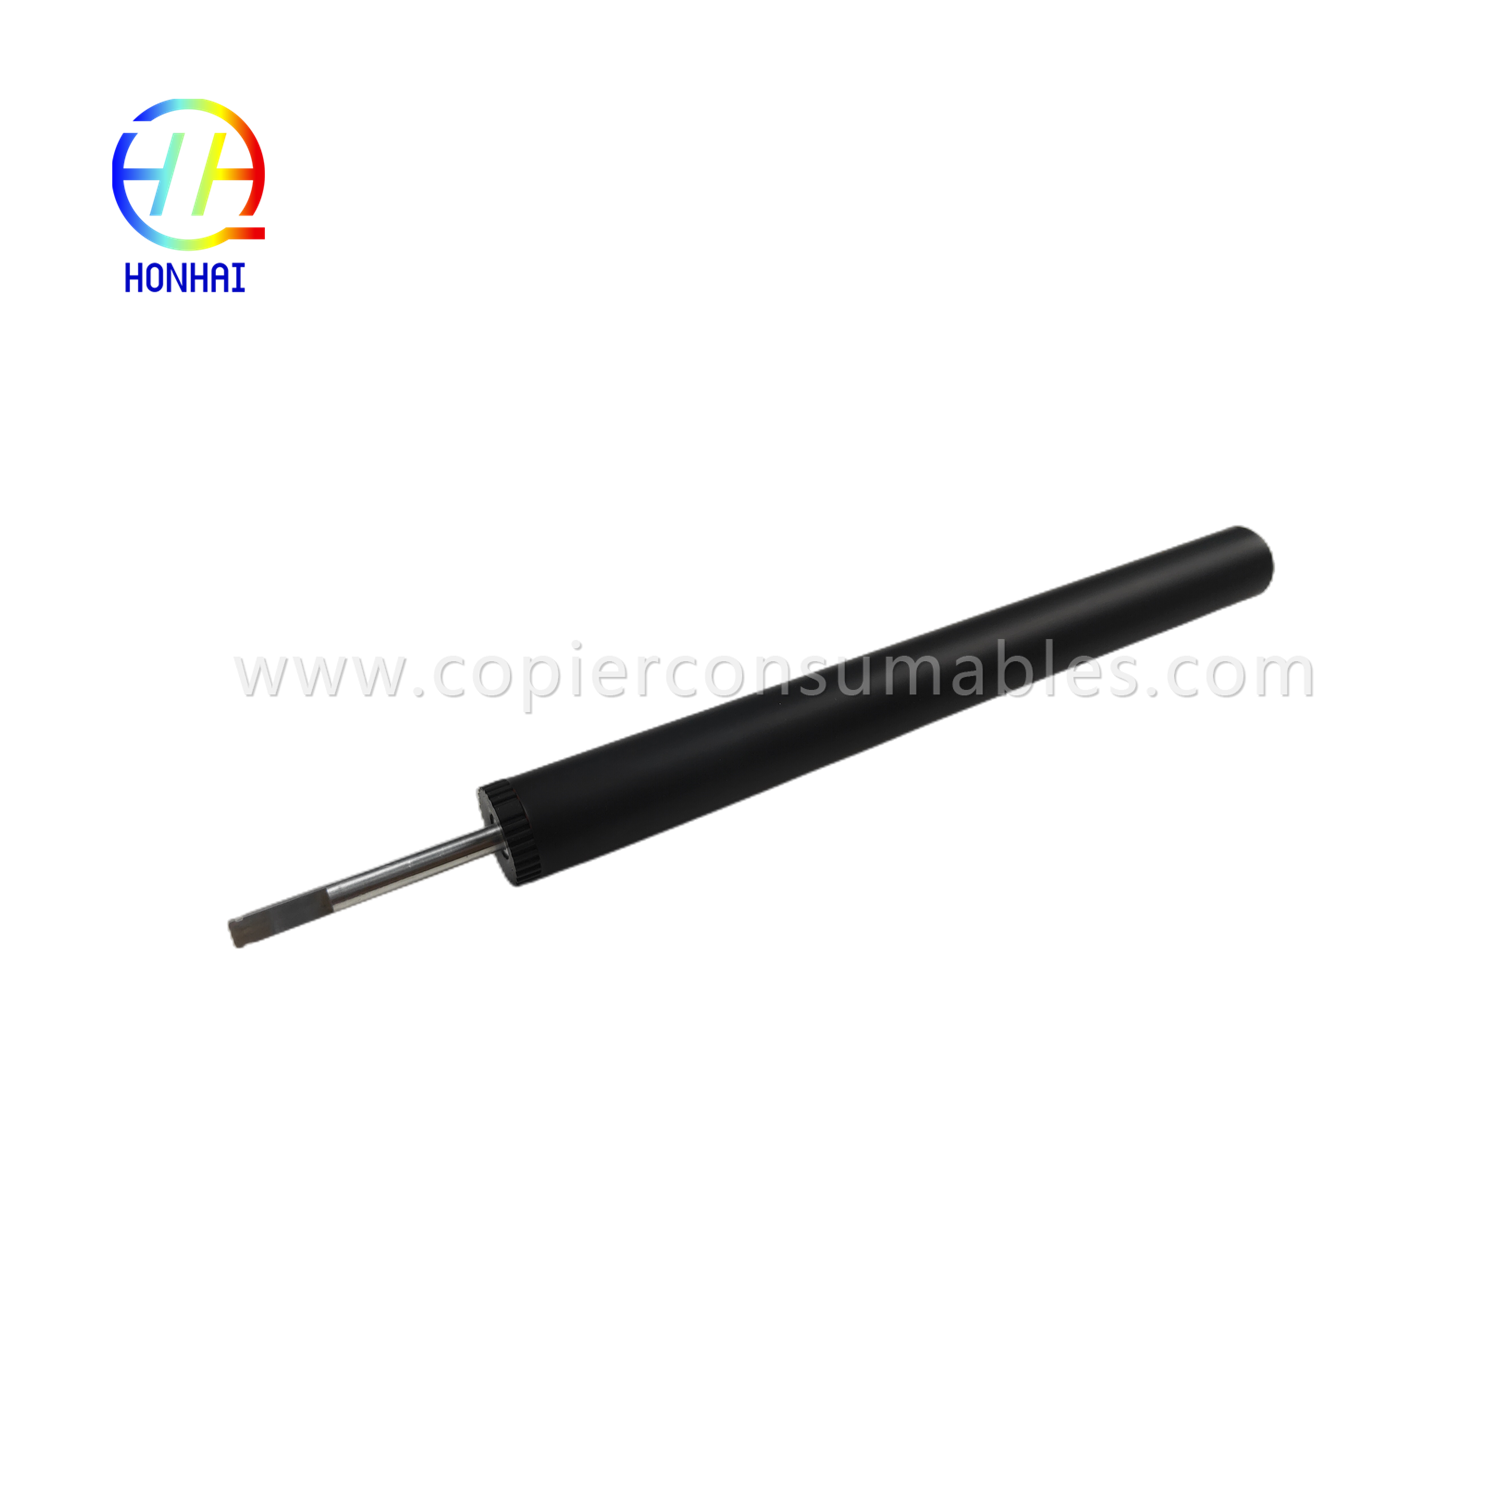 https://www.copierconsumables.com/lower-button-roller-for-canon-ir-1018-1019-1022-1023-1024-1025-lower-sleeved-pression-roller-product/